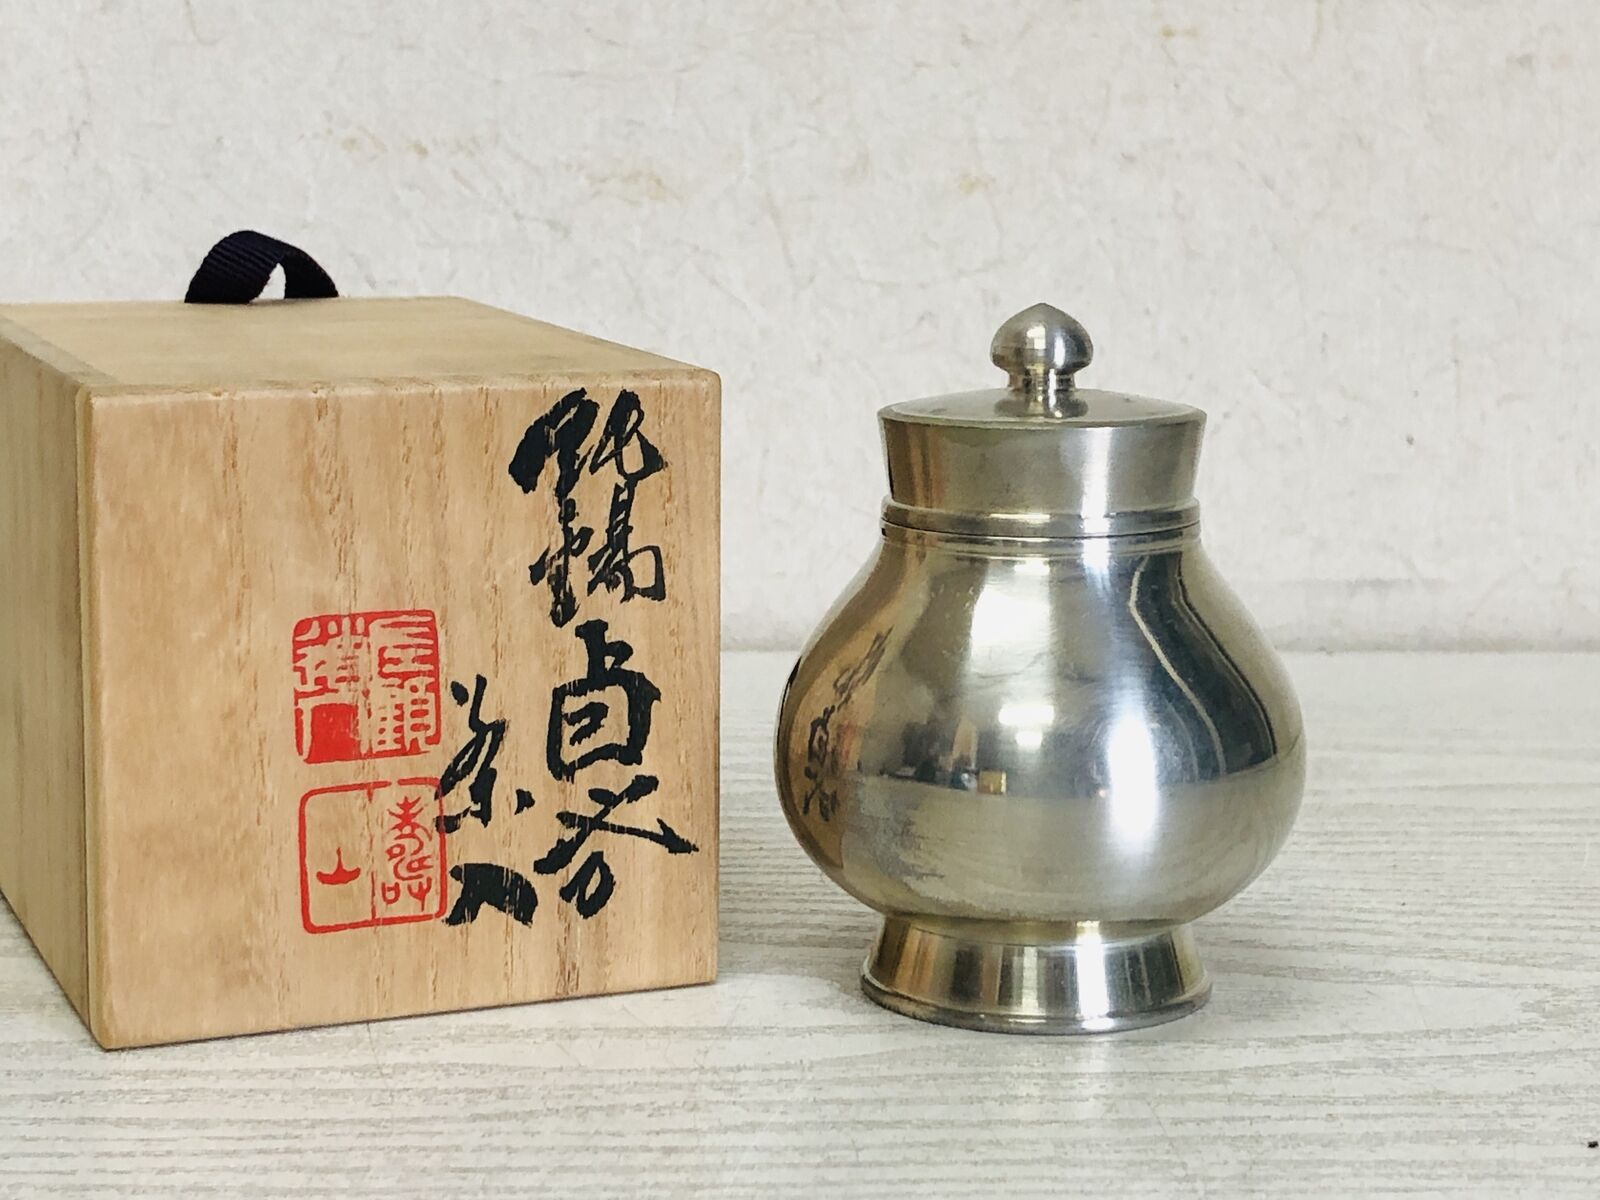 Y3215 TEA CADDY Tin container signed box Japanese Tea Ceremony a